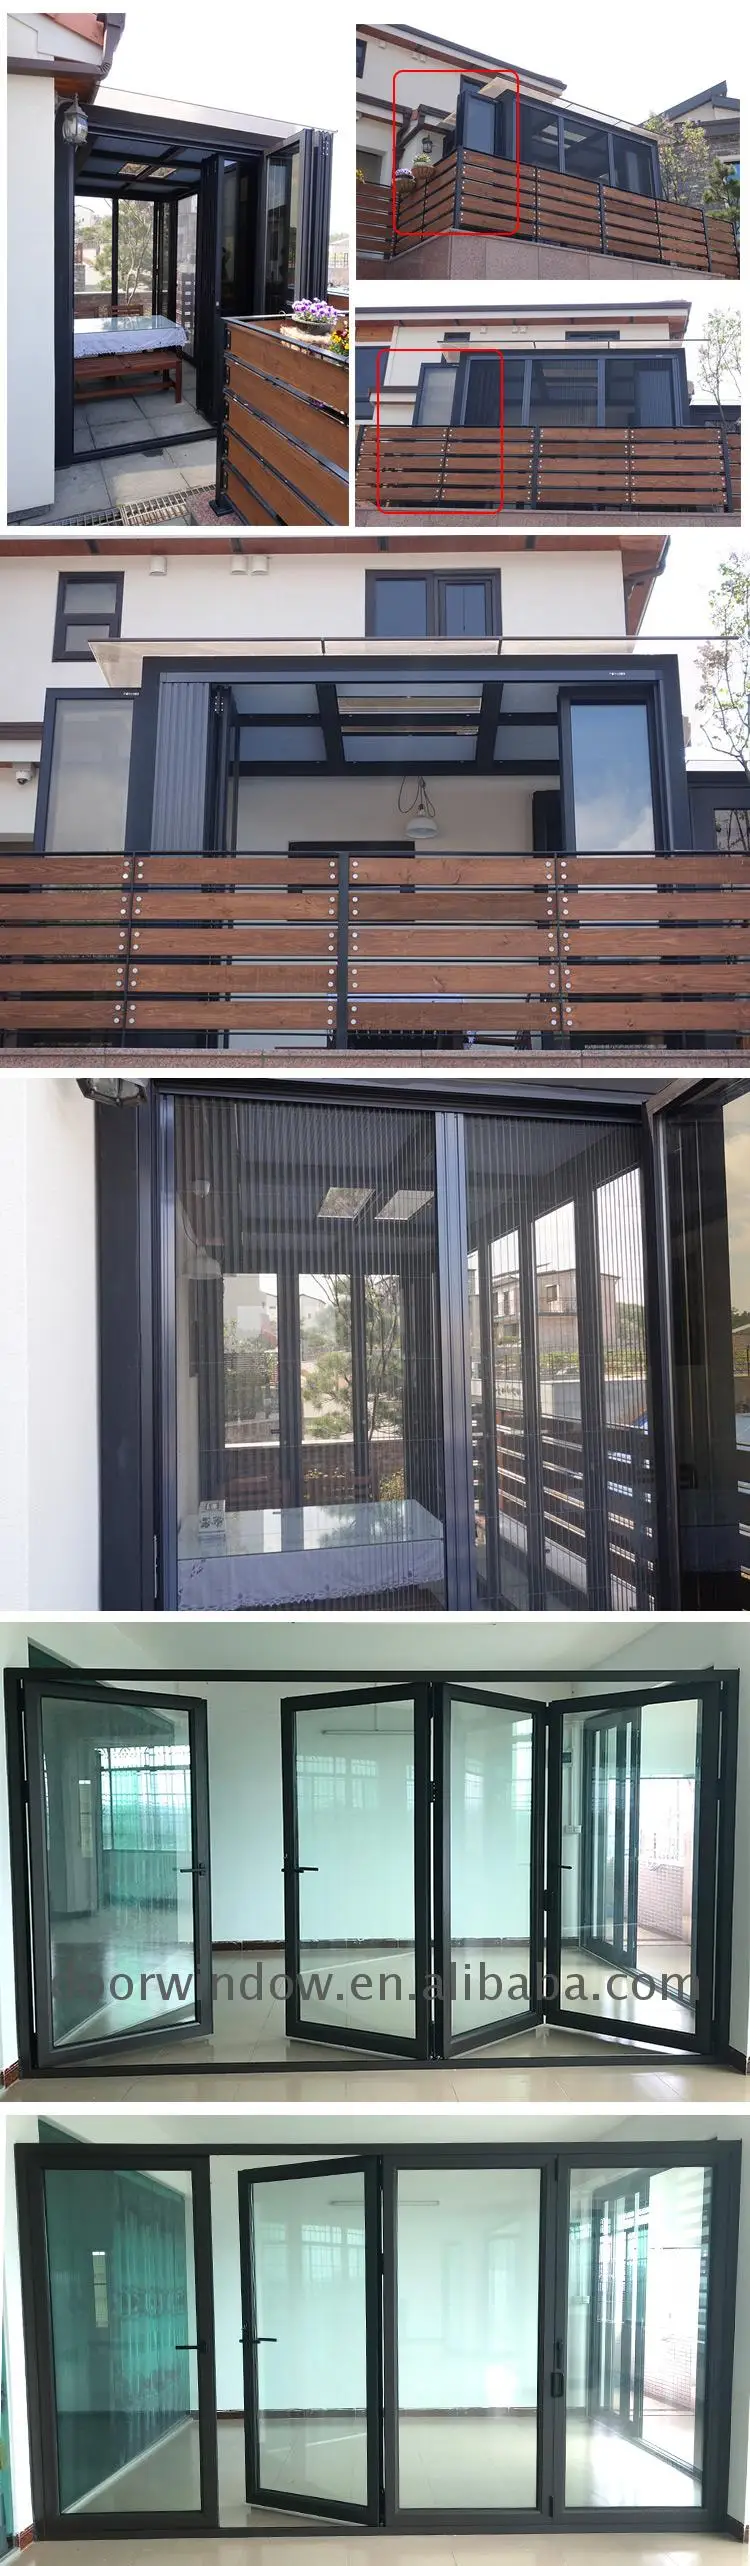 Aluminum garage door prices product framed casement frame glass swing with strong tightness